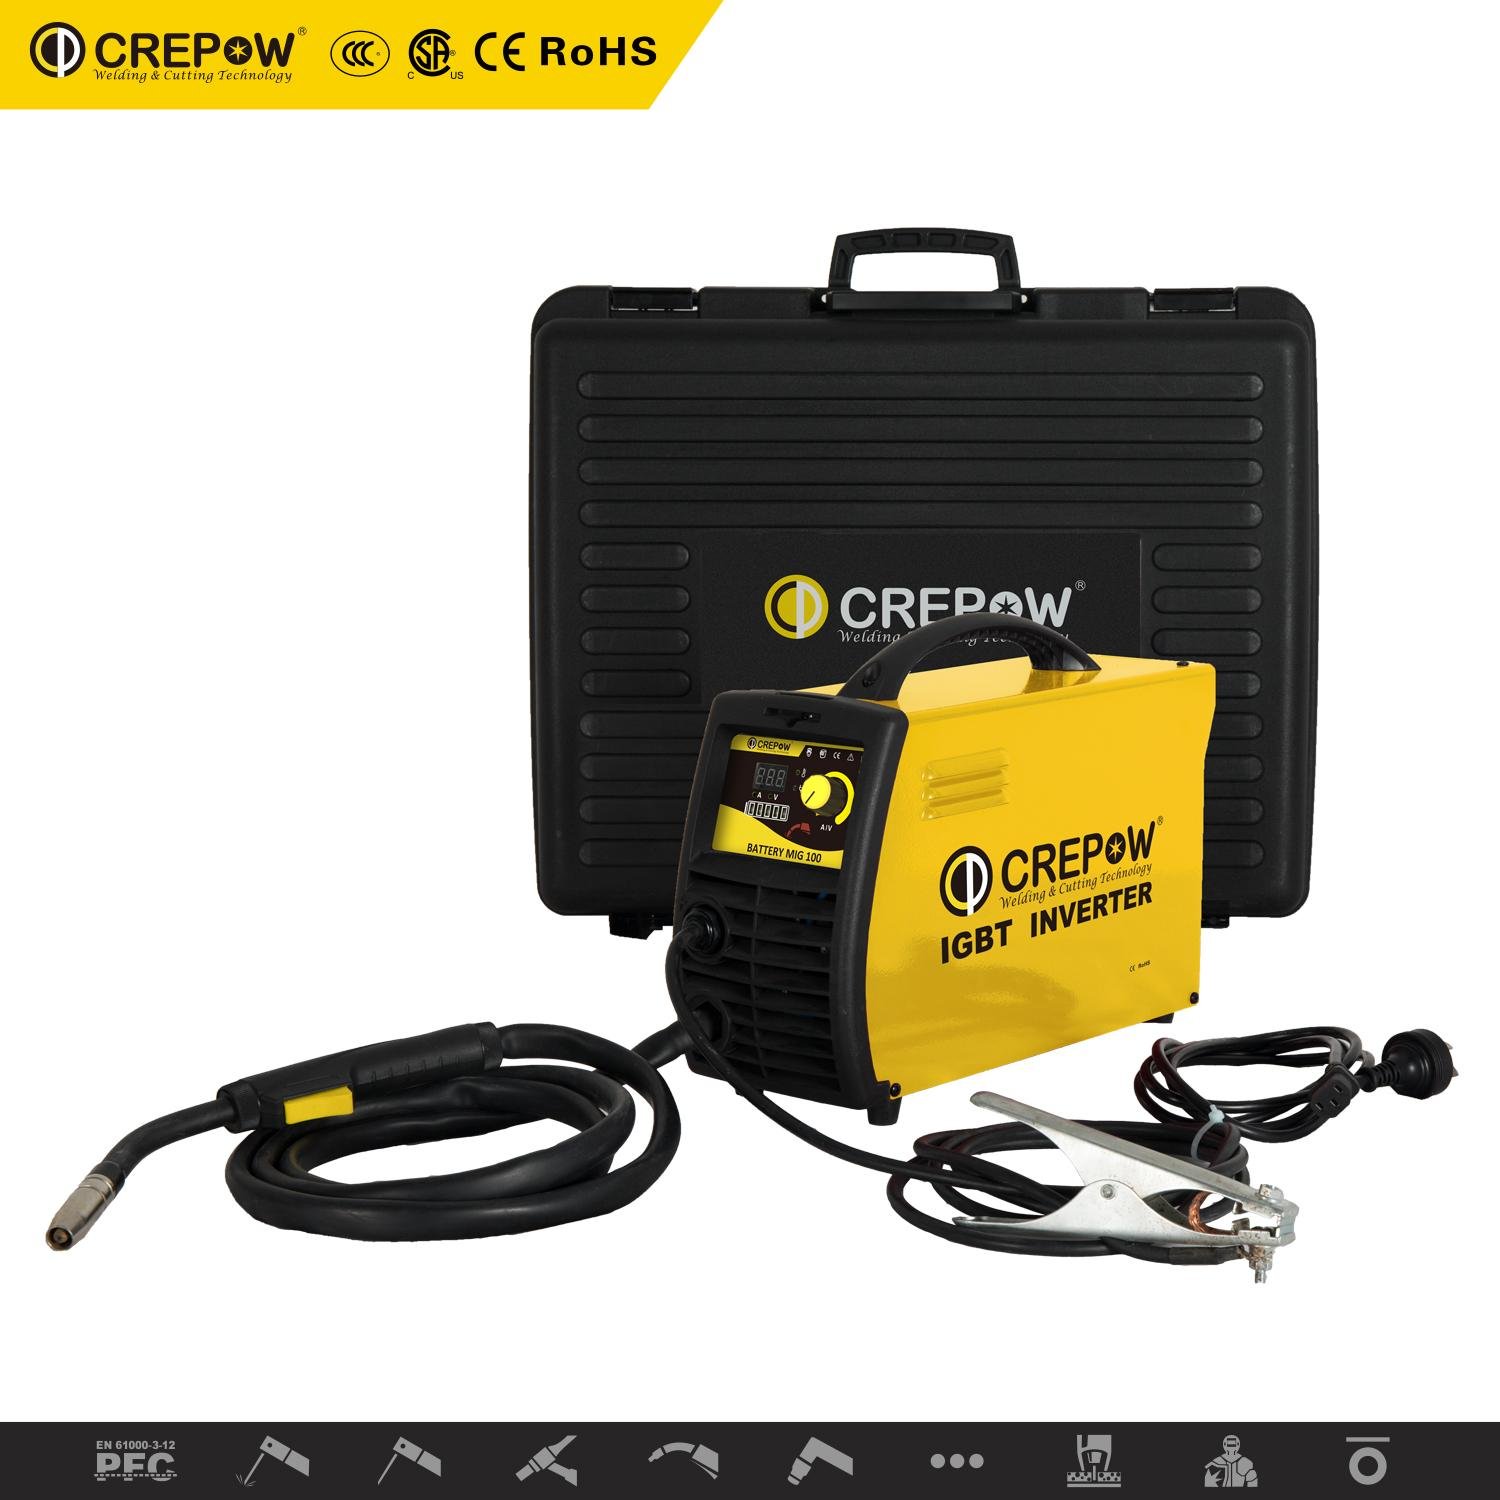 Crepow Battery Welder MIG100 gasless with D100 wire spool size 2